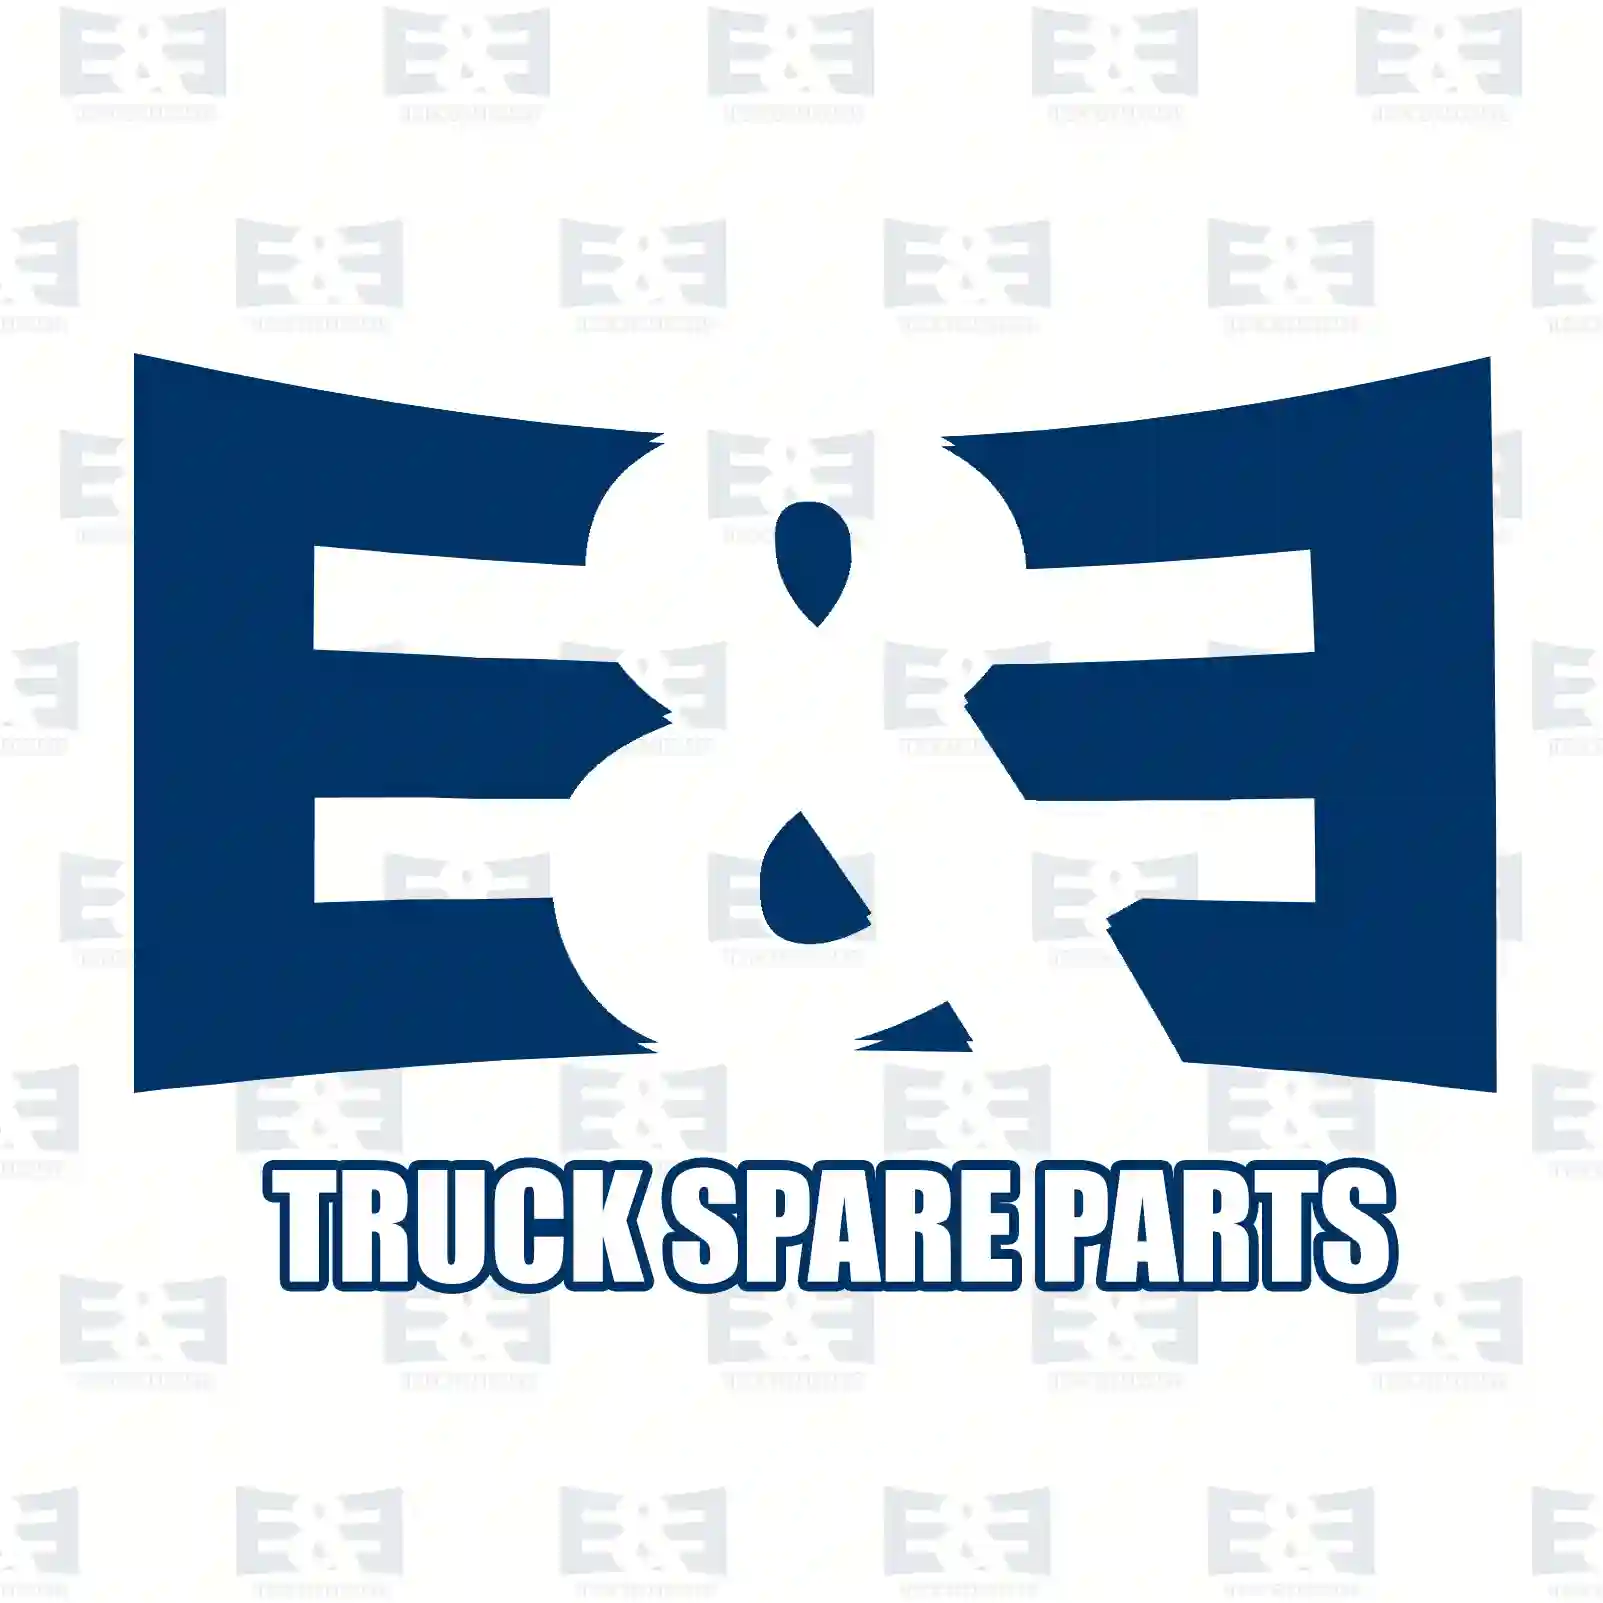 Spring brake cylinder, right, without bracket, 2E2295631, 204208018 ||  2E2295631 E&E Truck Spare Parts | Truck Spare Parts, Auotomotive Spare Parts Spring brake cylinder, right, without bracket, 2E2295631, 204208018 ||  2E2295631 E&E Truck Spare Parts | Truck Spare Parts, Auotomotive Spare Parts